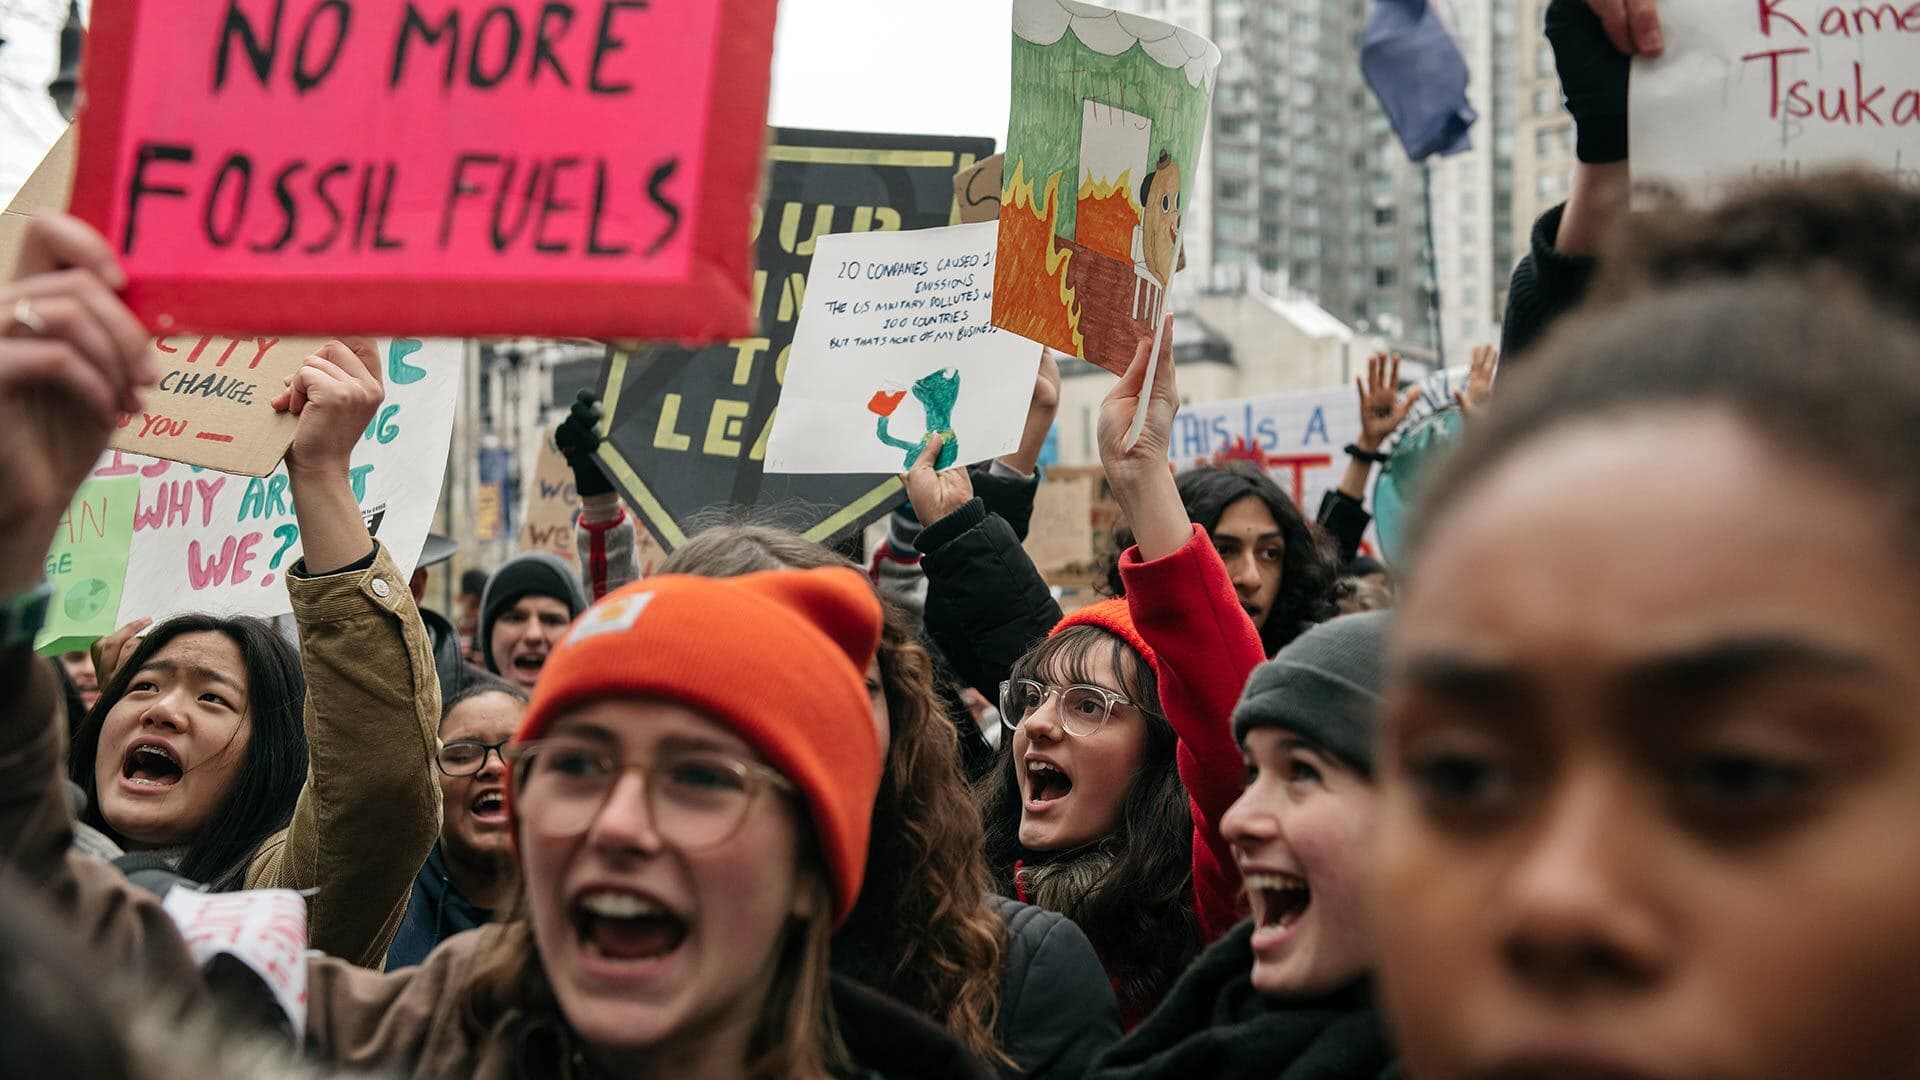 Young people at a climate protest